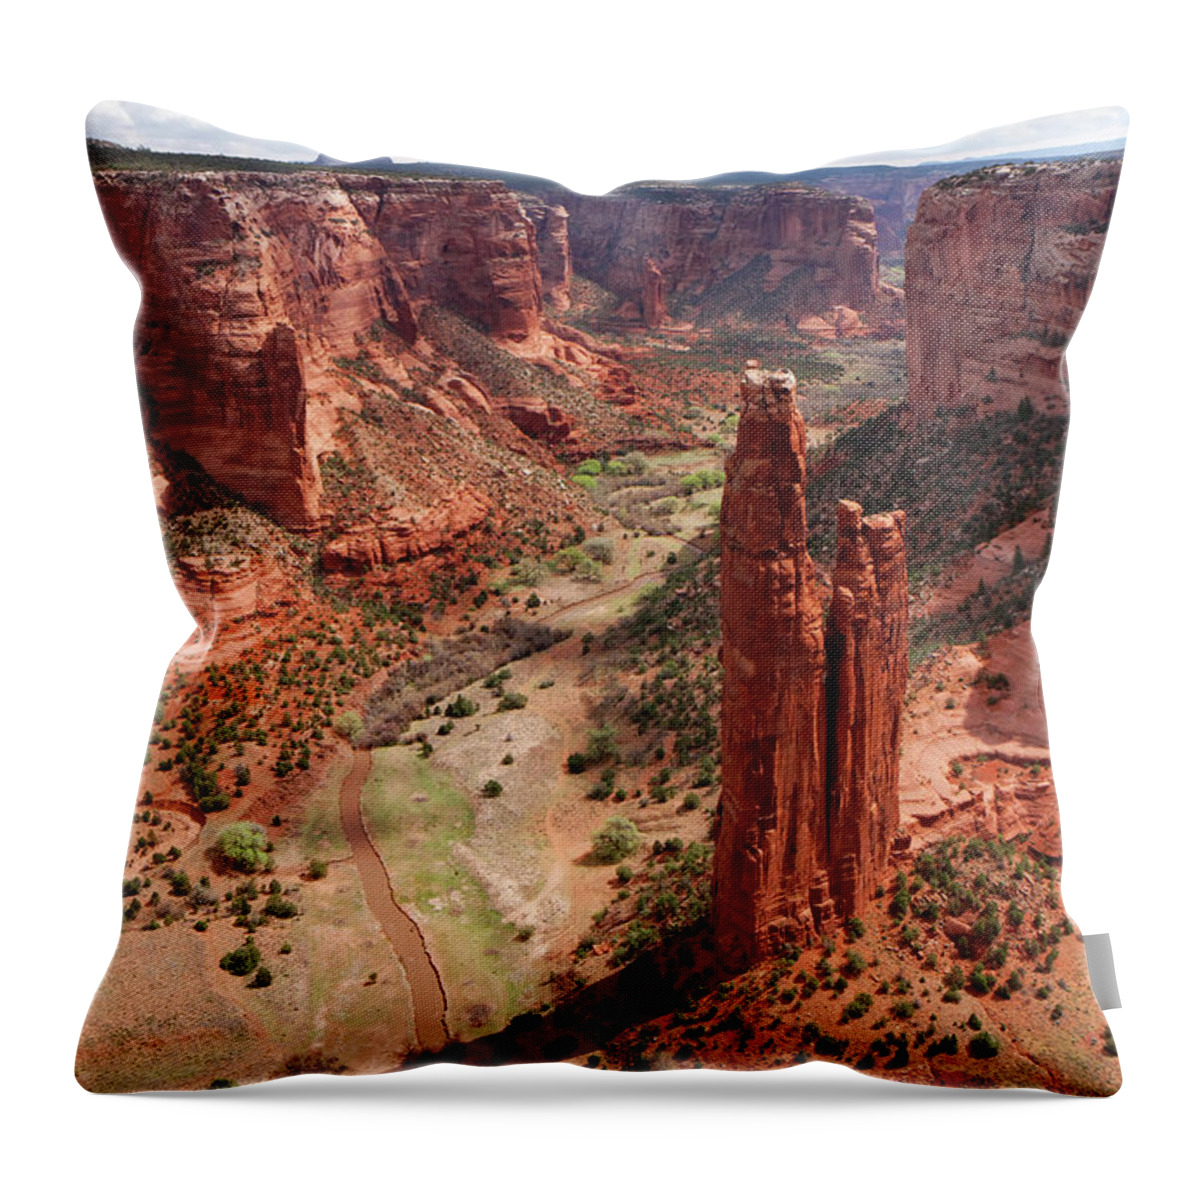 Scenics Throw Pillow featuring the photograph Spider Rock by Jlr